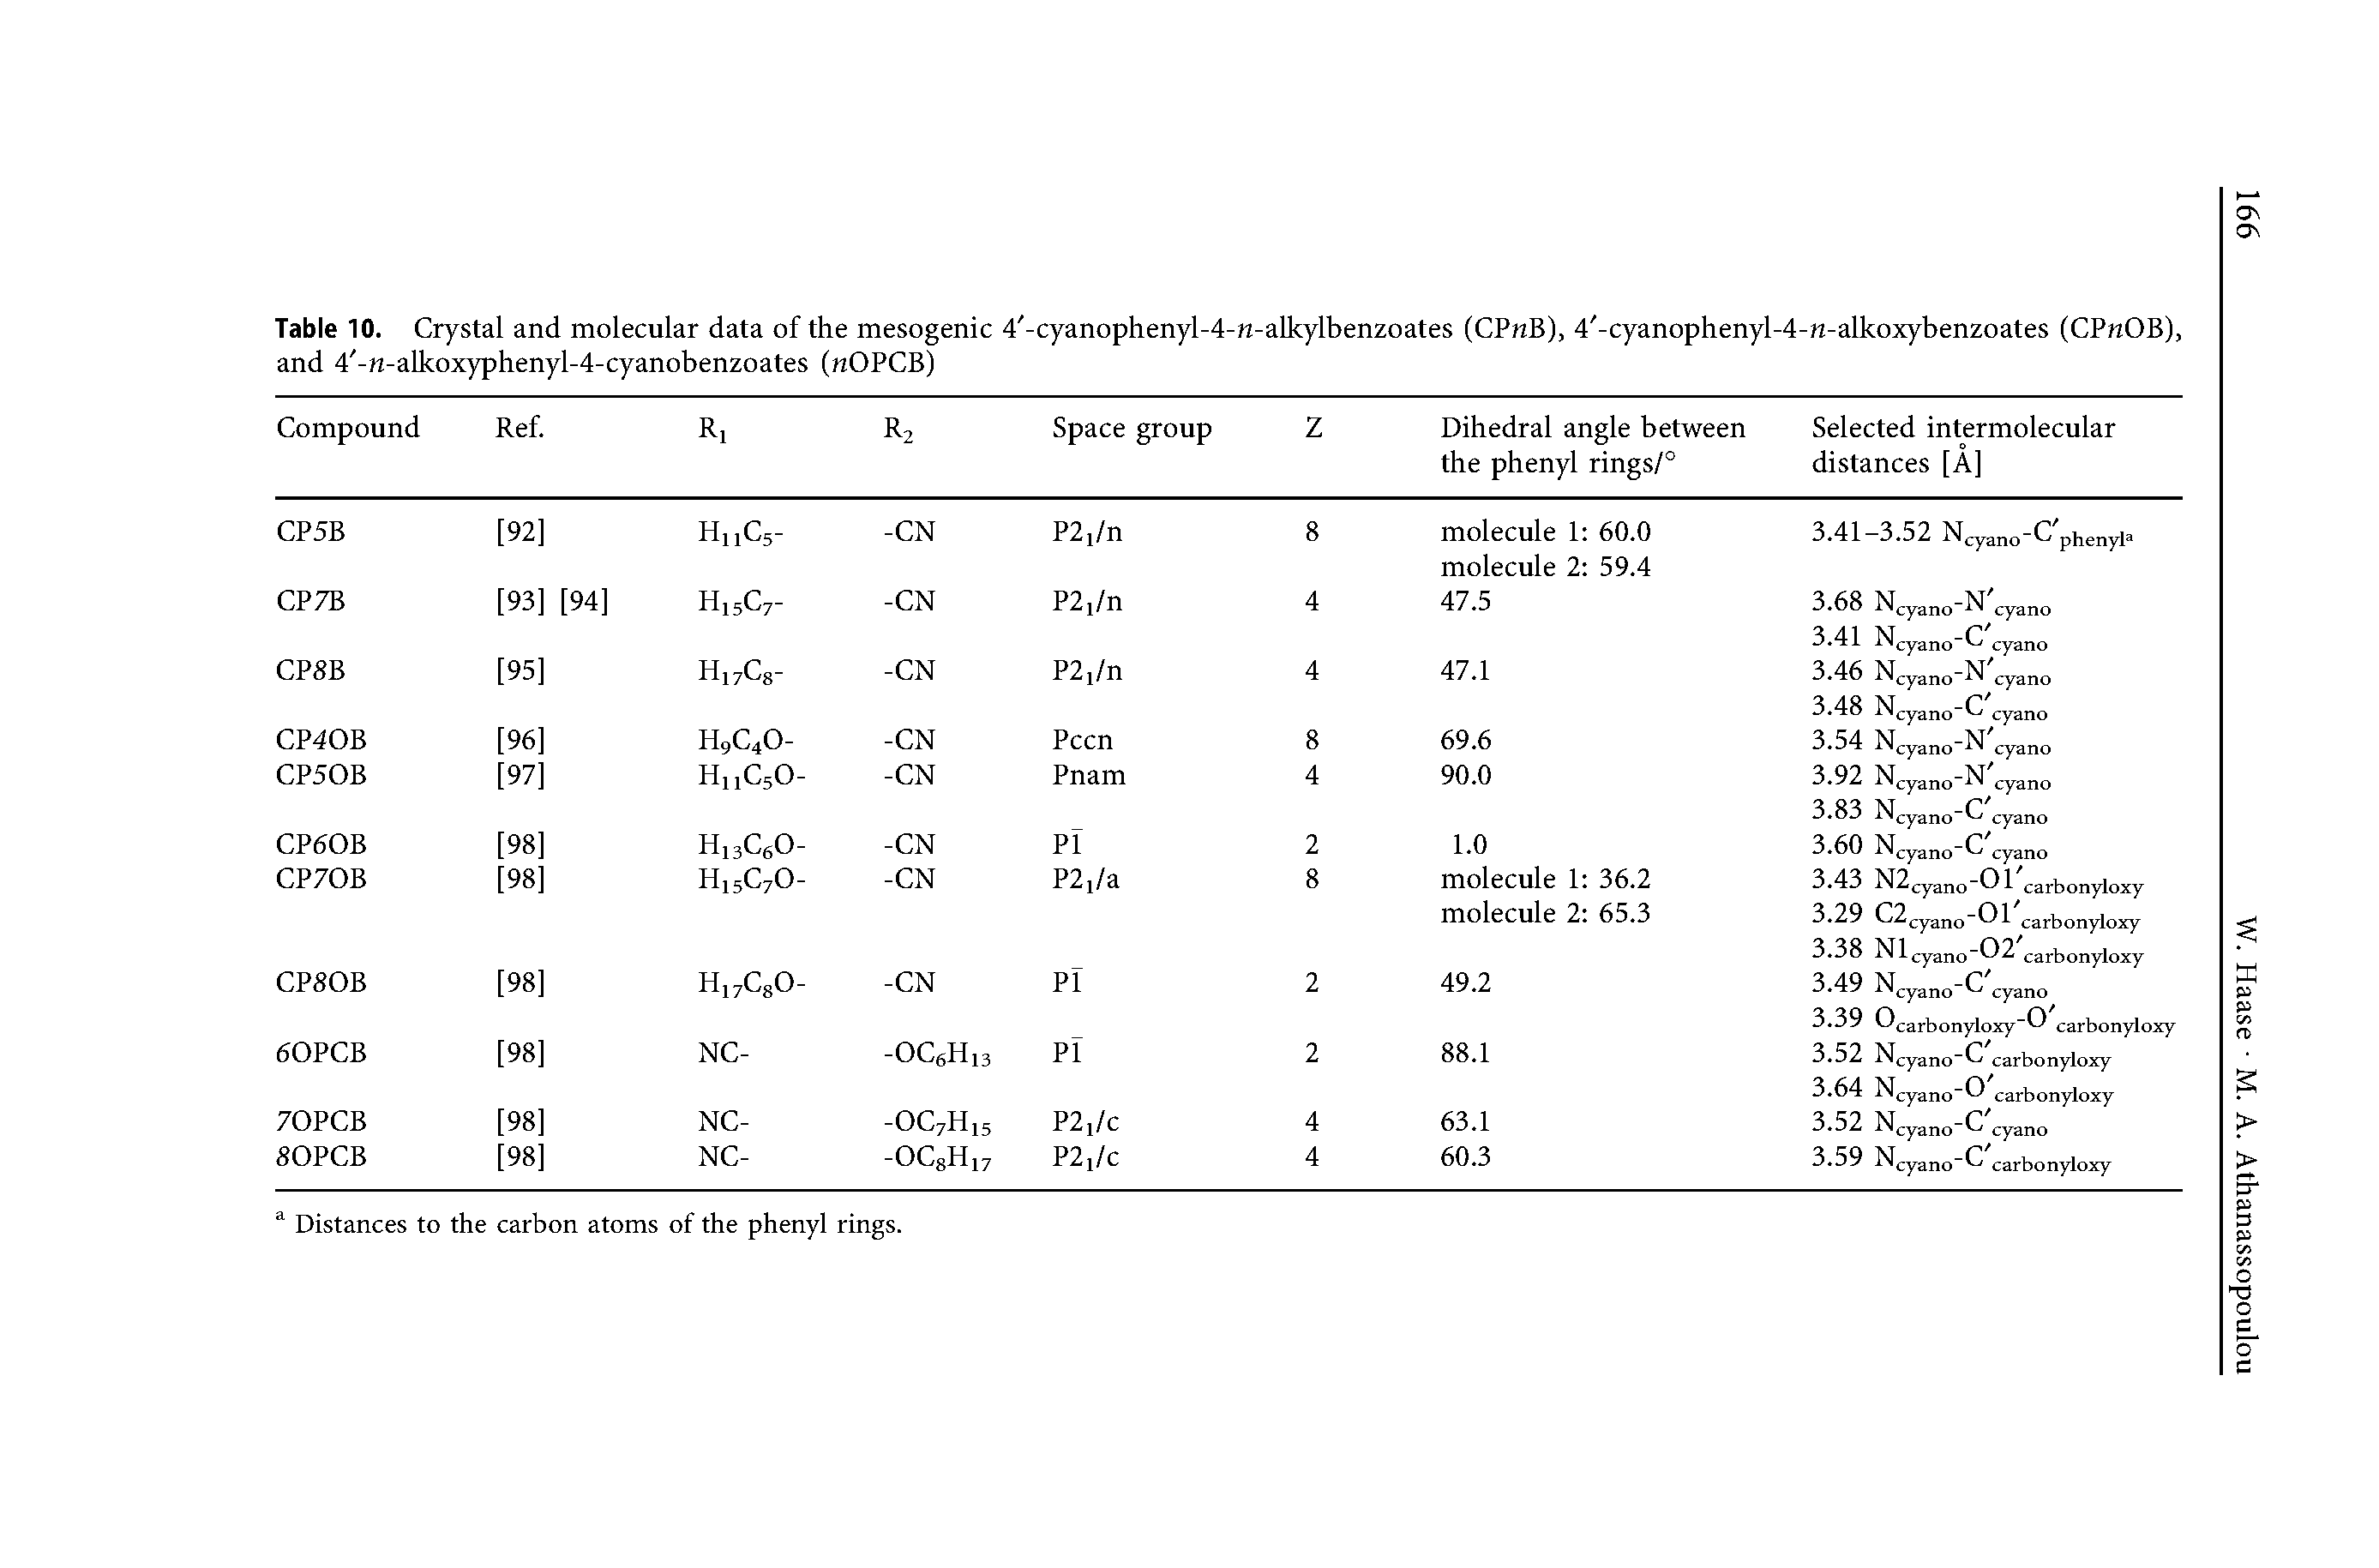 Table 10. Crystal and molecular data of the mesogenic 4 -cyanophenyl-4-n-alkylbenzoates (CPnB), 4 -cyanophenyl-4-n-alkoxybenzoates (CPnOB), and 4 -n-alkoxyphenyl-4-cyanobenzoates (nOPCB)...